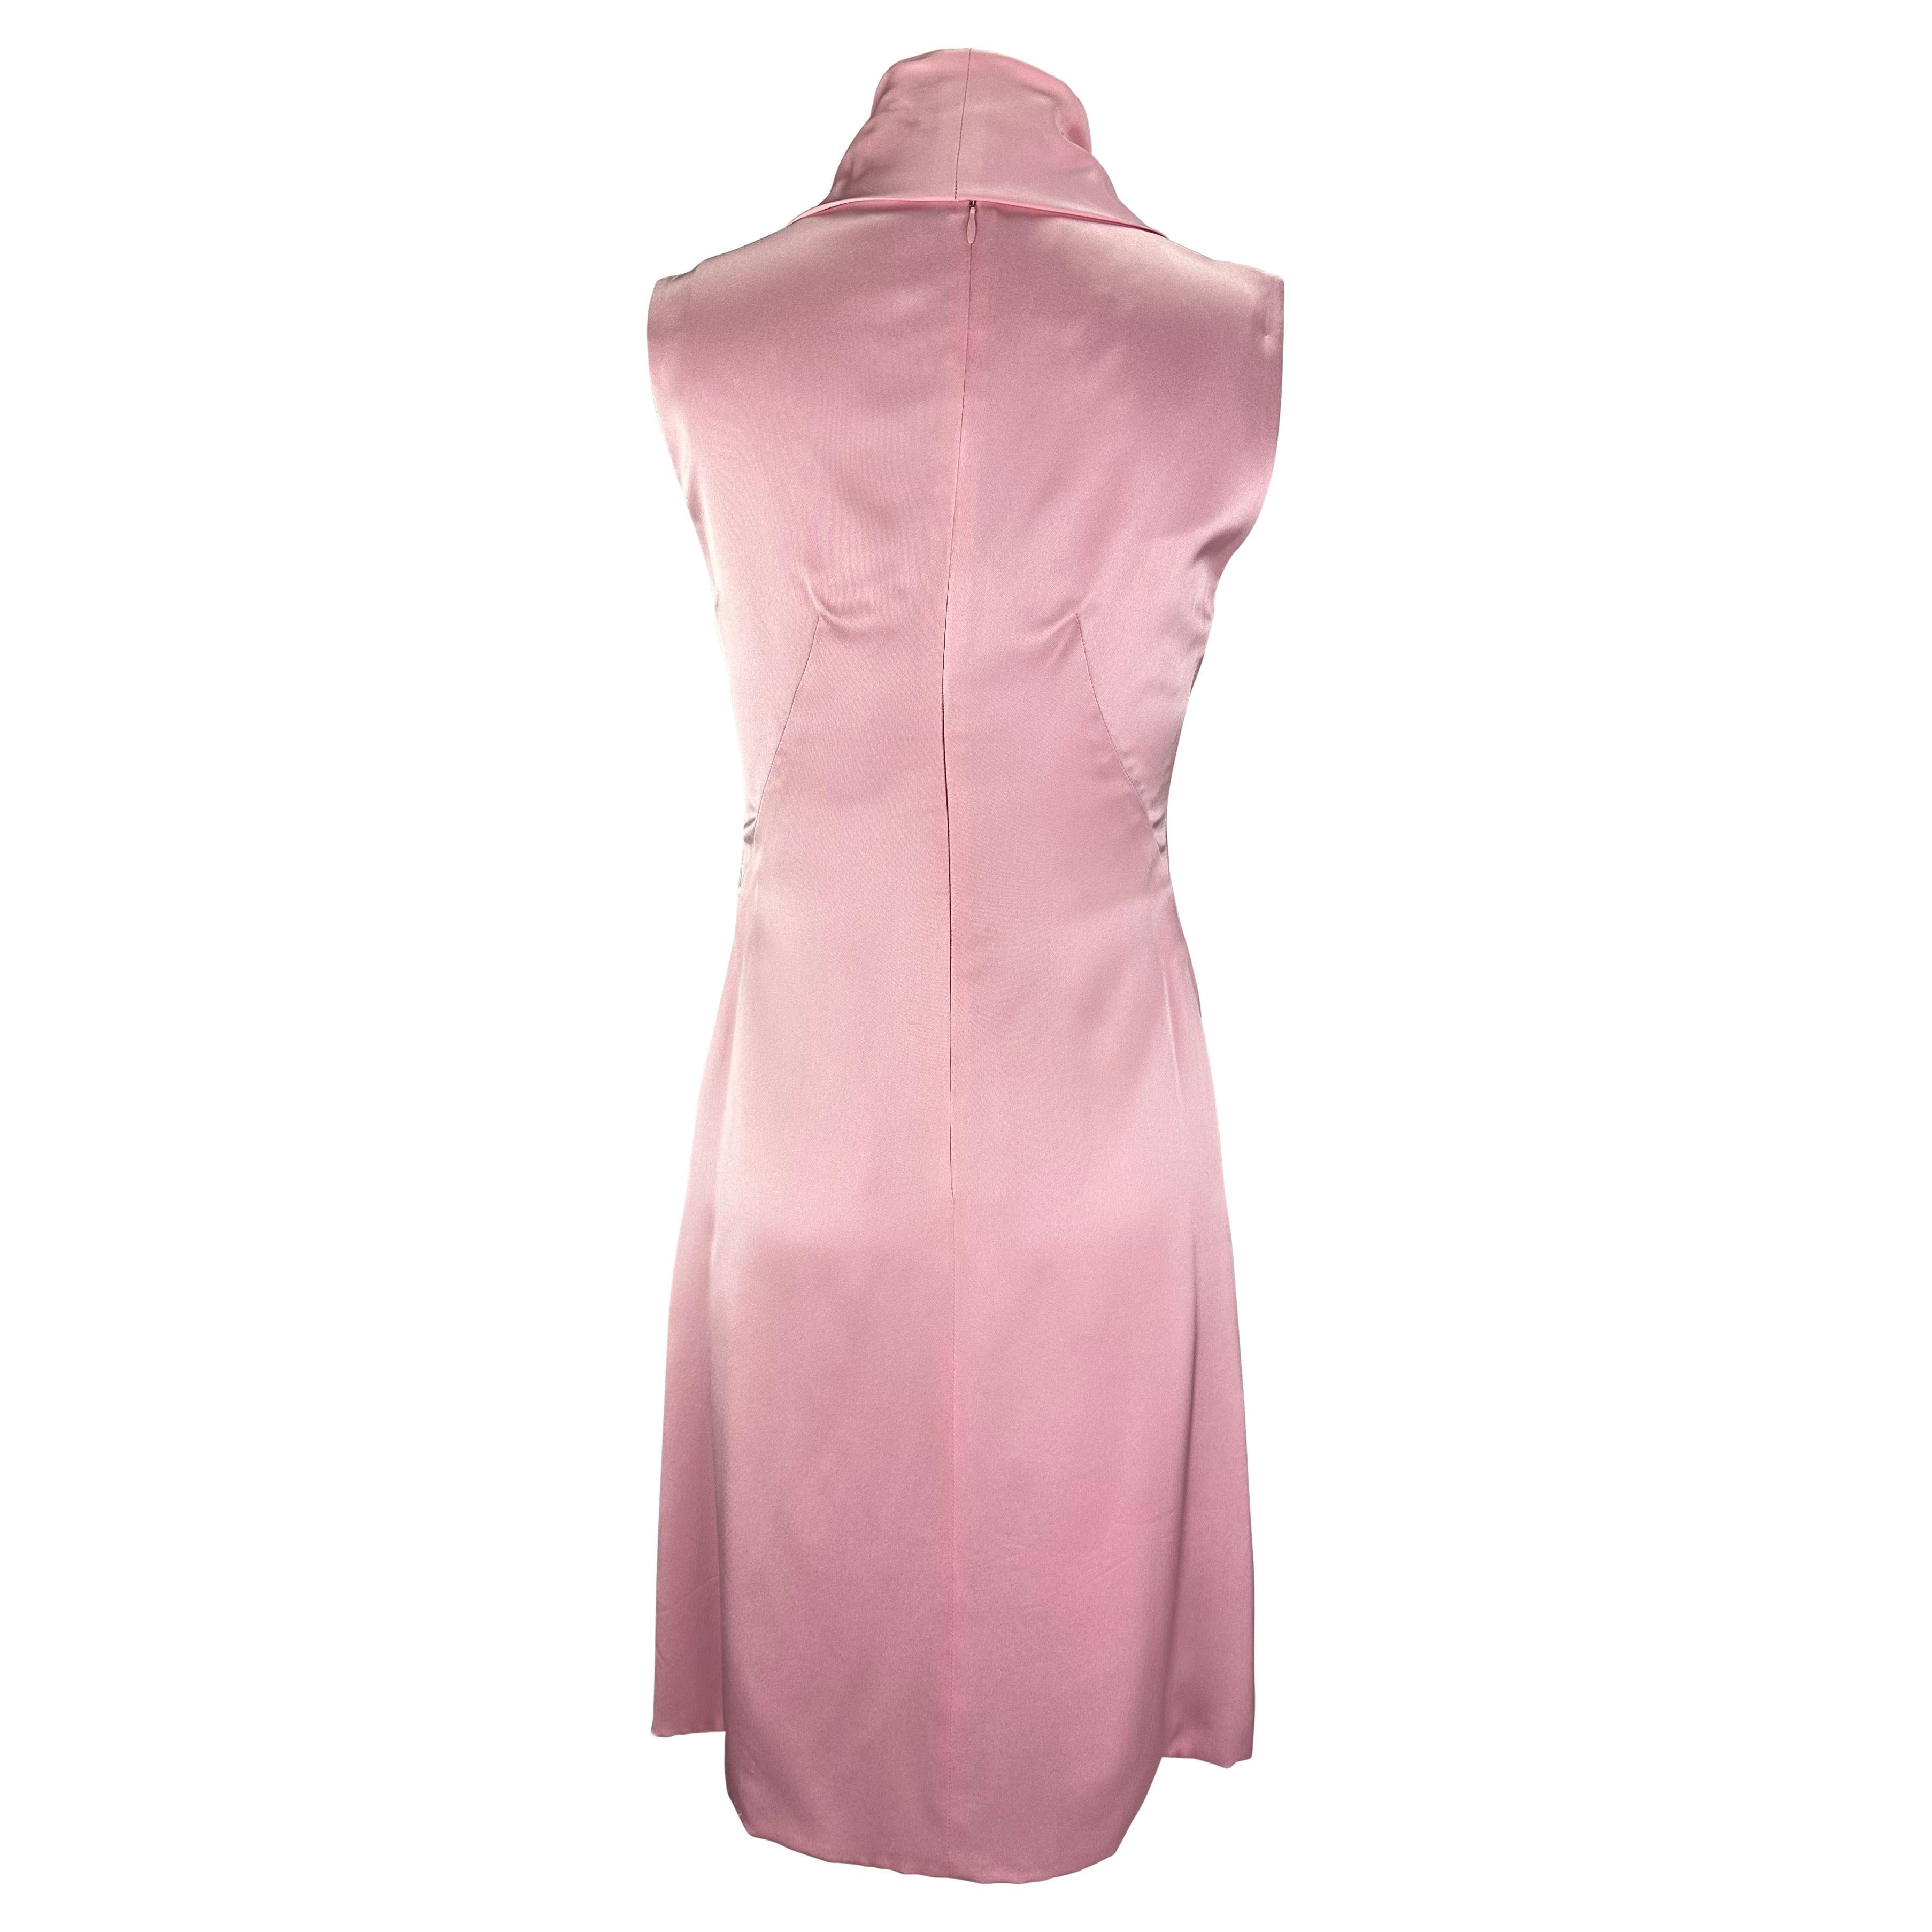 Women's Early 2000s Gianni Versace by Donatella Light Pink Silk Cowl Neck Mini Dress For Sale